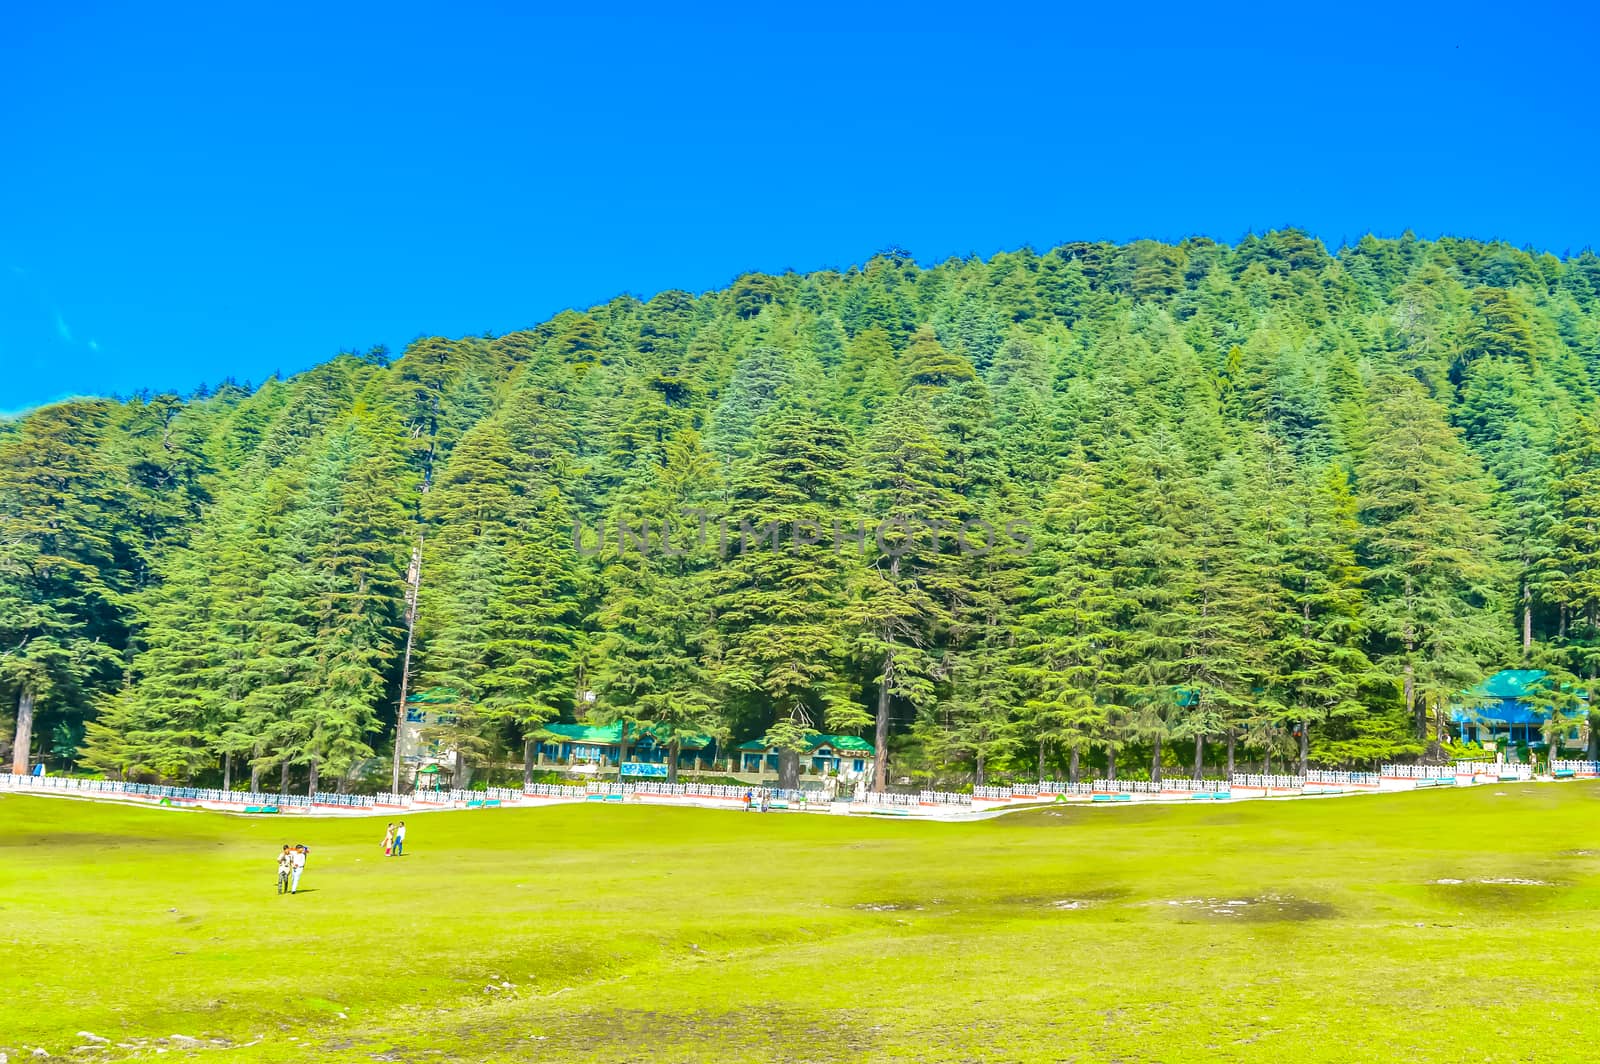 landscape of grass field in park or garden surrounded with green tree this place for relaxing exercise running or walking in park with moving cloud above blue sky